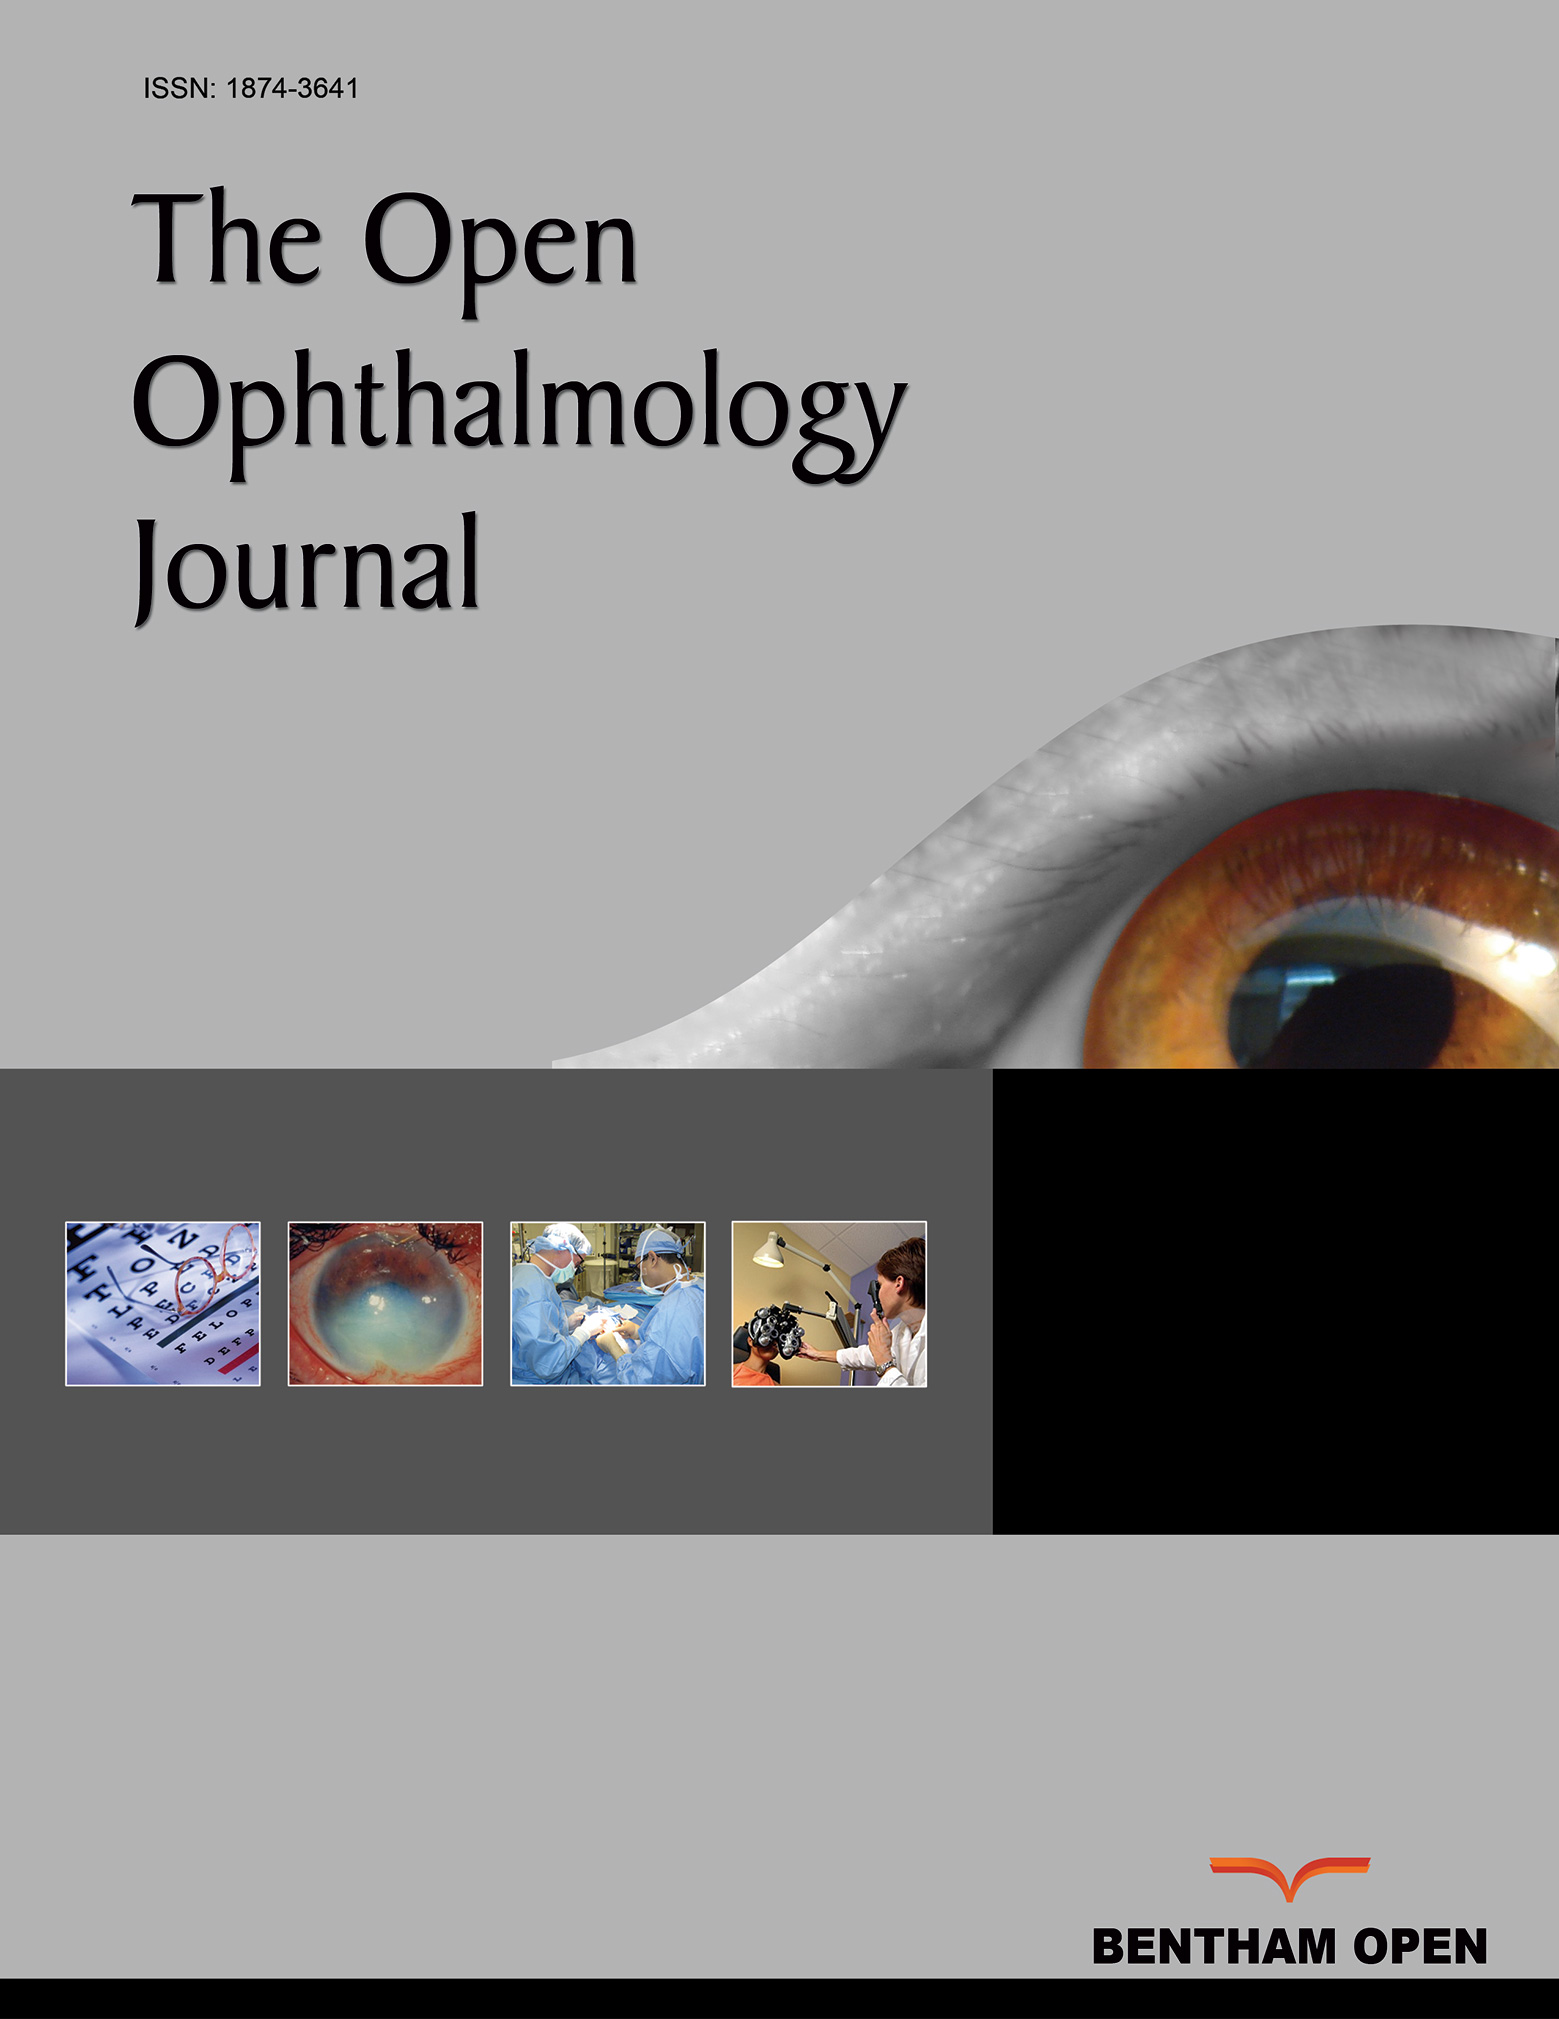 The Open Ophthalmology Journal